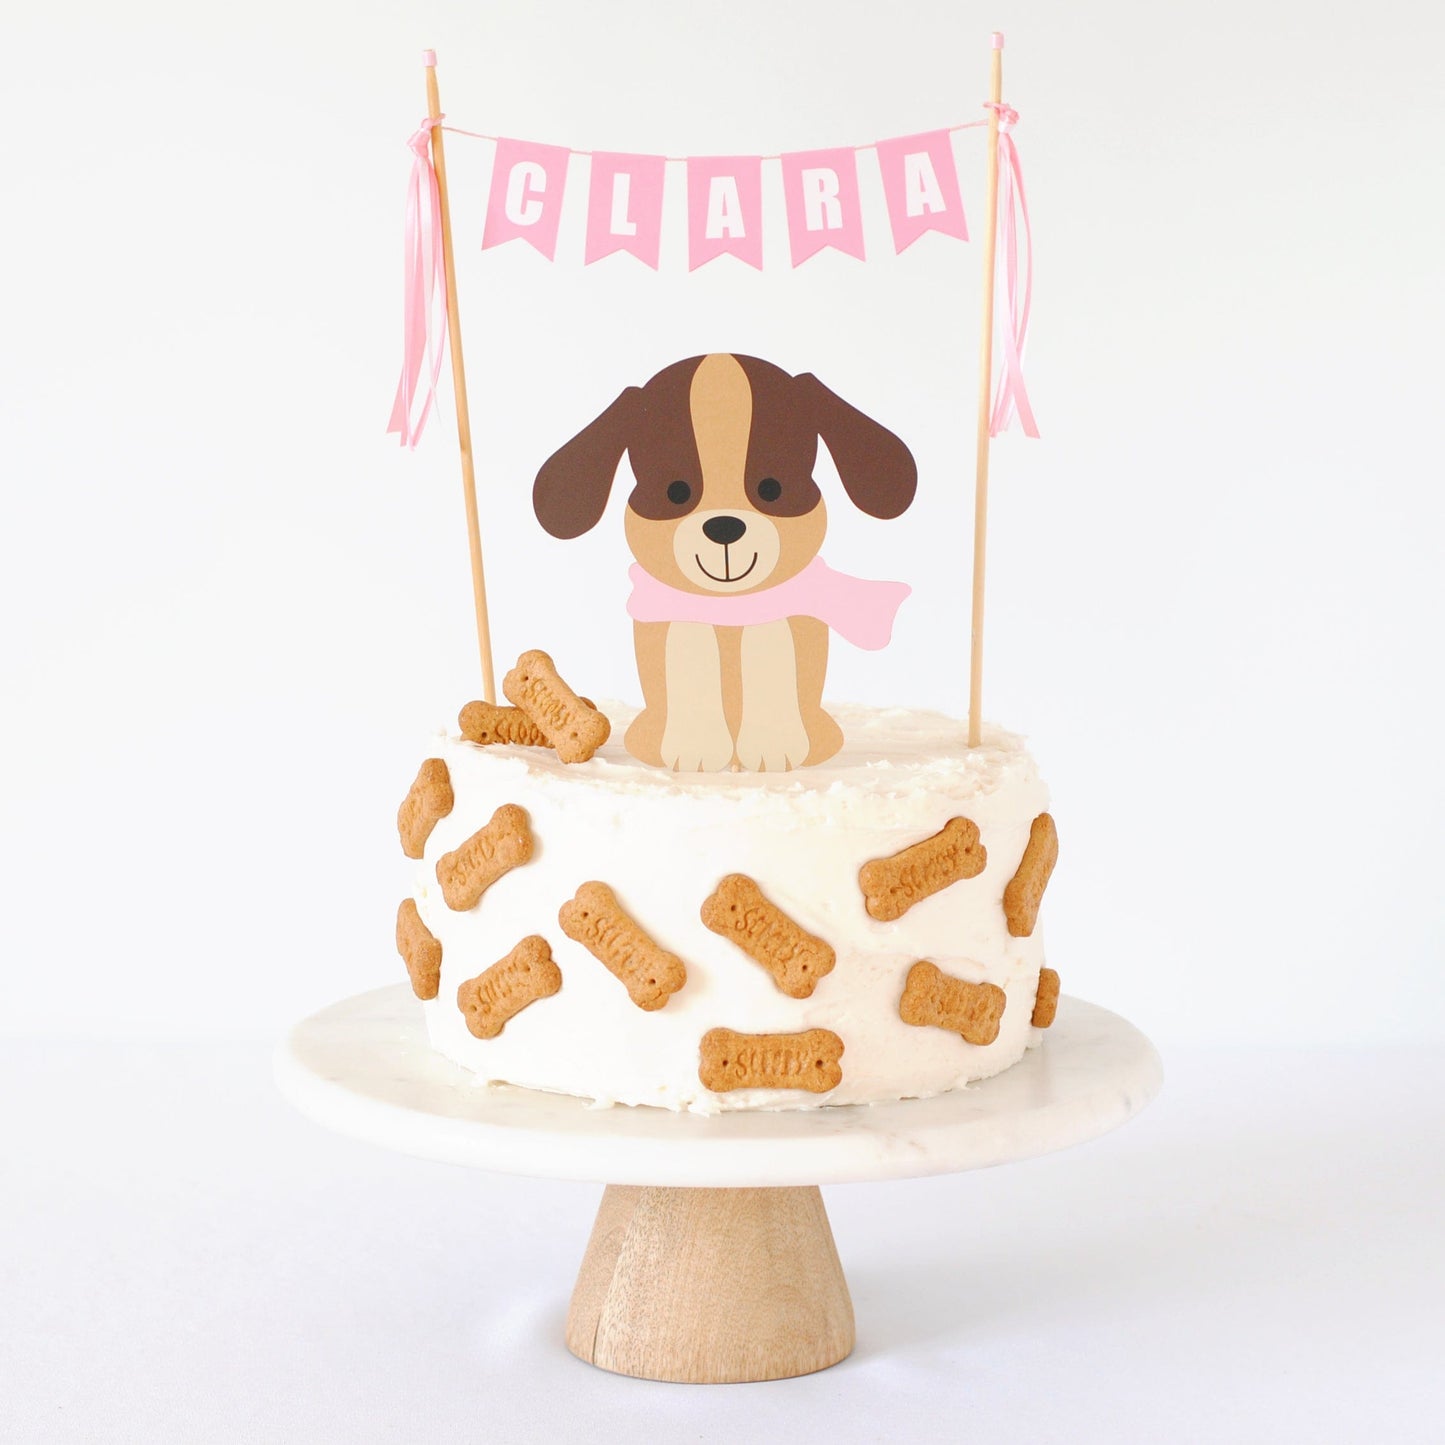 
                  
                    puppy theme cake topper set with brown puppy wearing a pink scarf and pink name banner on a white cake decorated with scooby snack cookies
                  
                